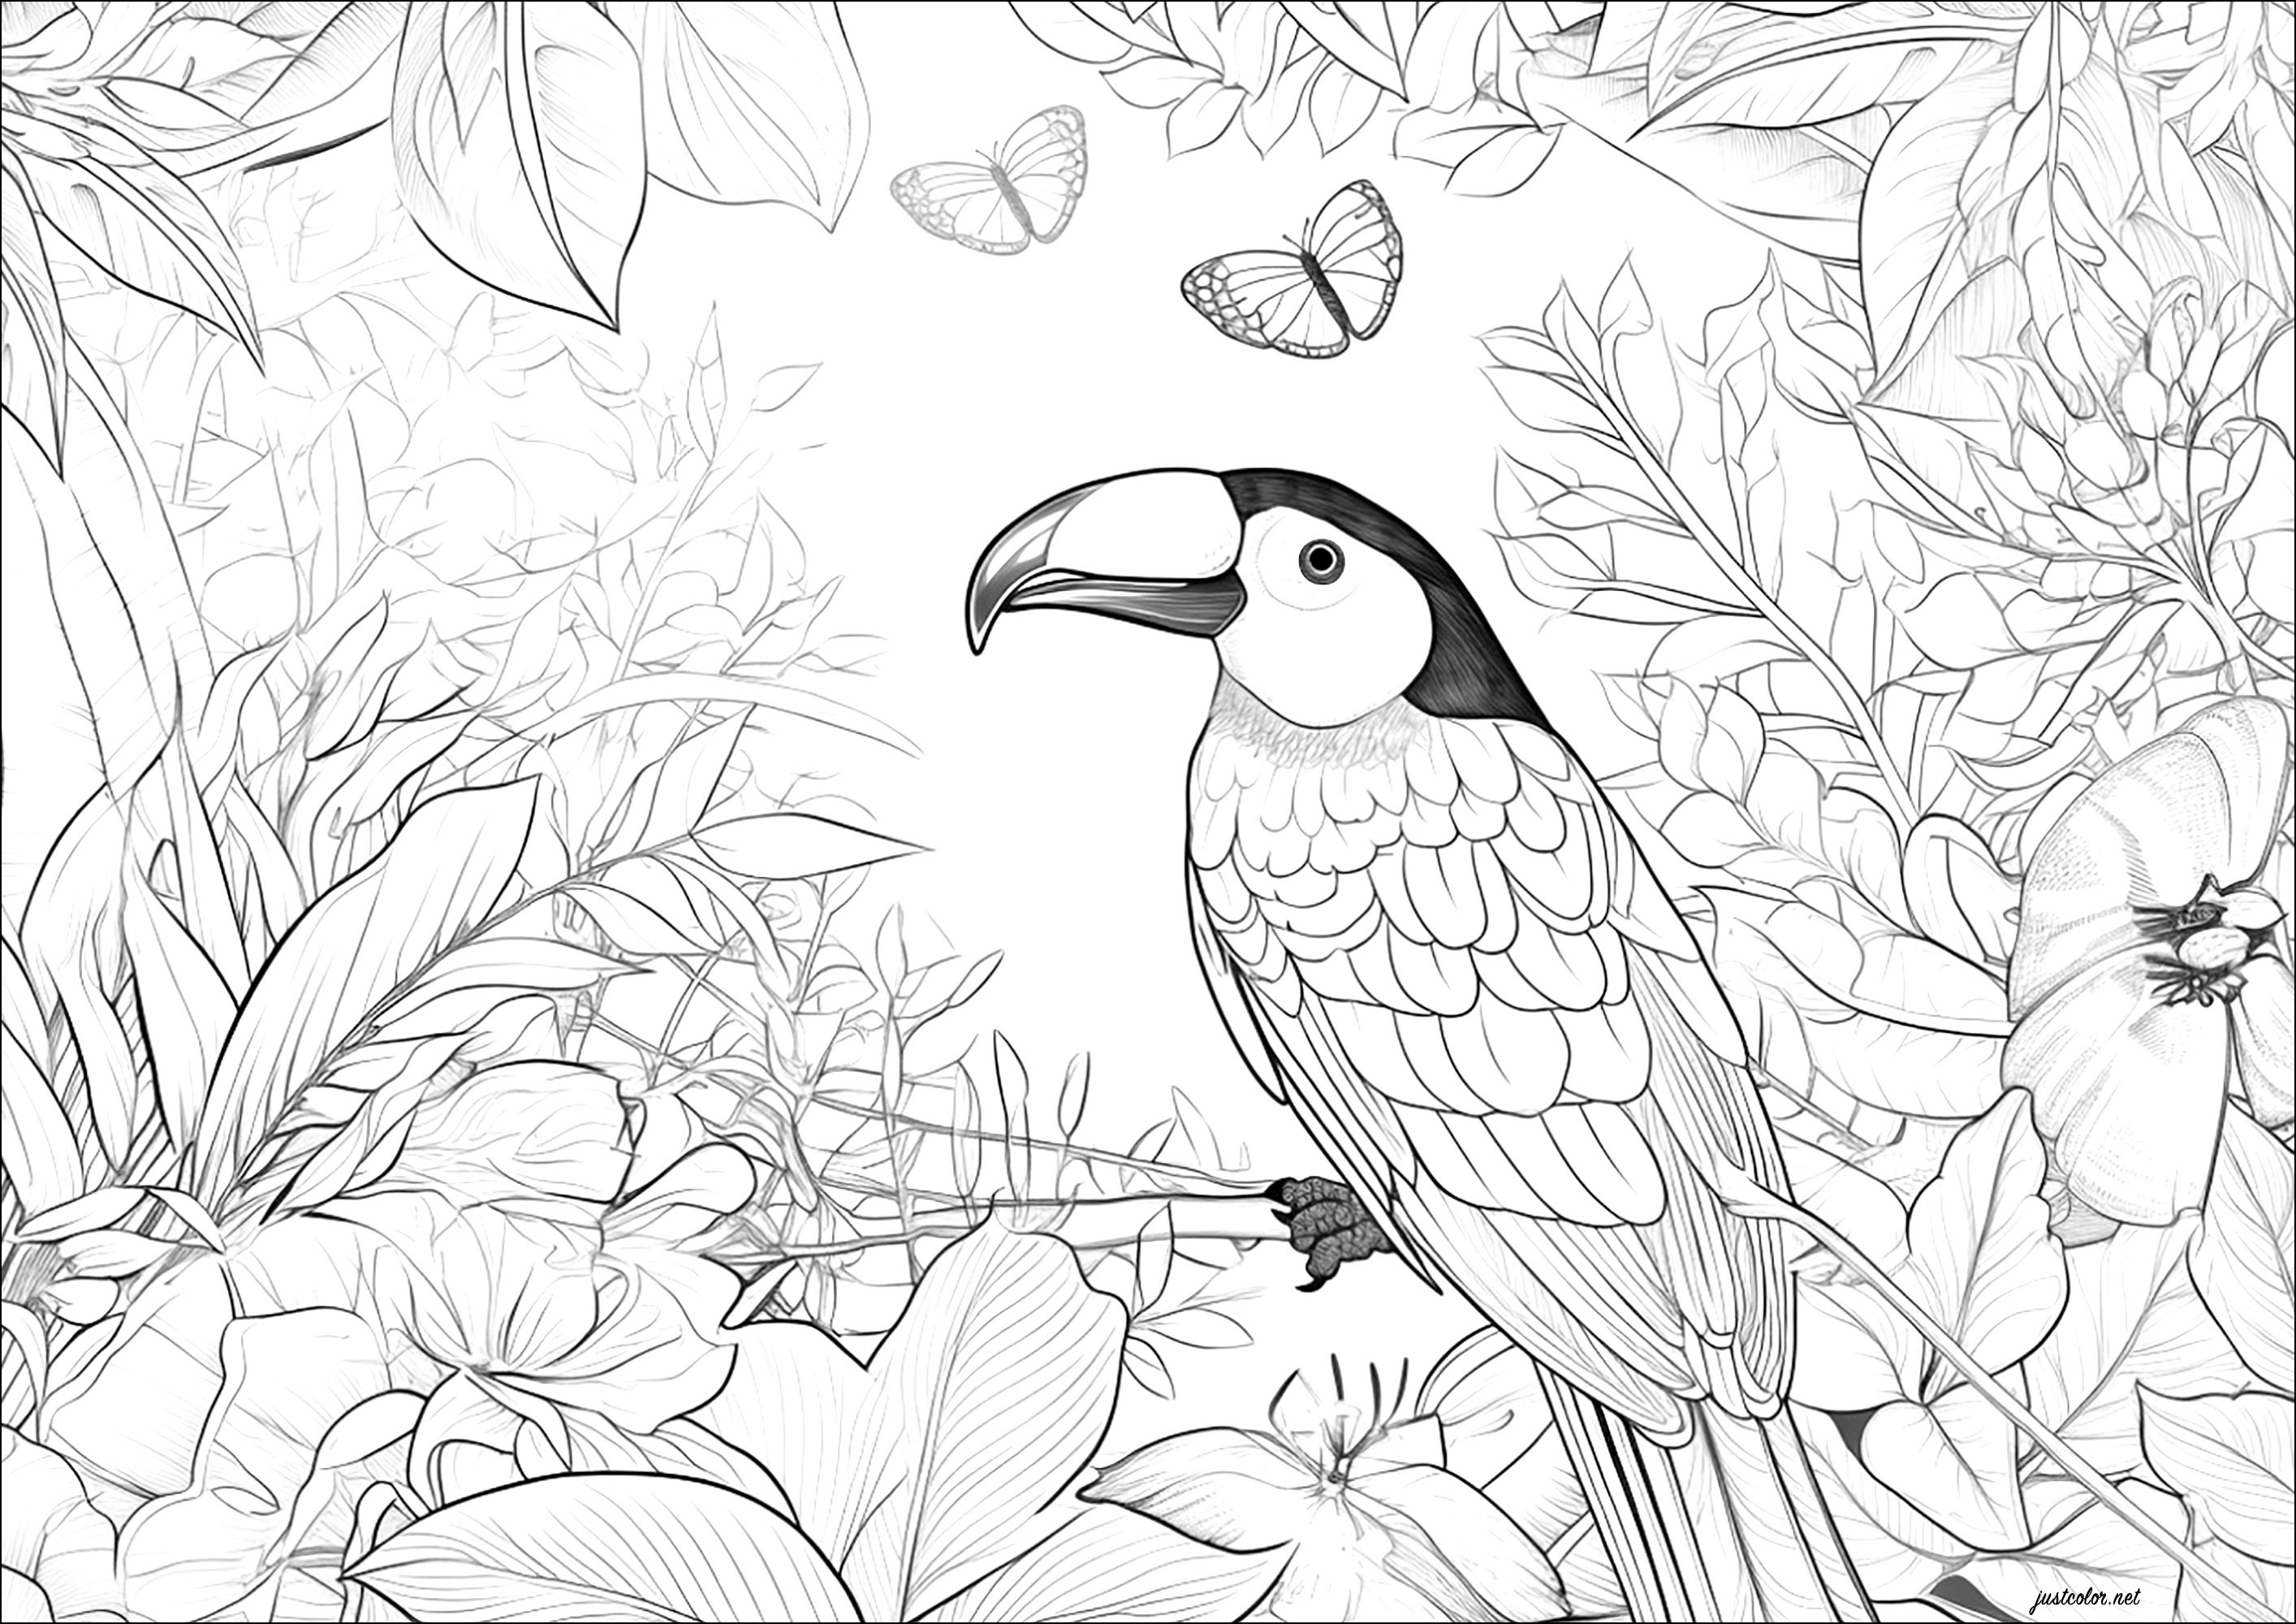 Tropical bird and pretty vegetation. Colour the pretty butterflies too